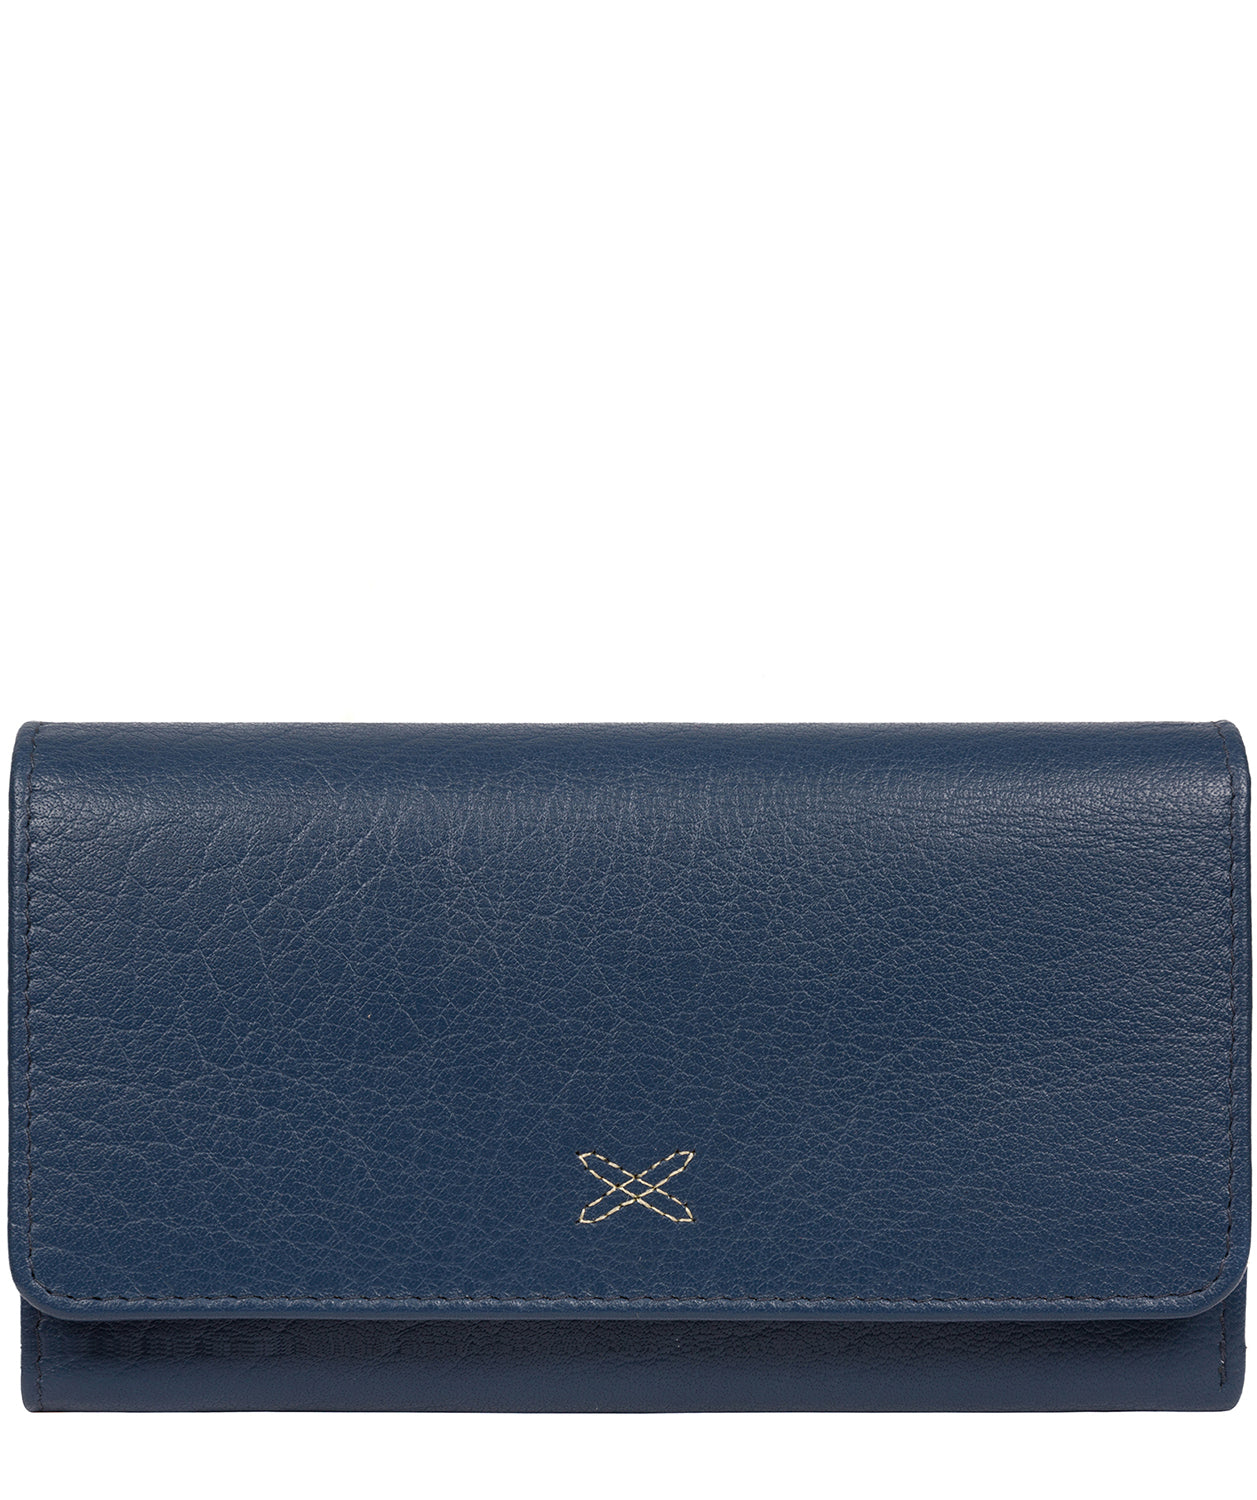 Blue Leather RFID Purse 'Dina' by Made By Stitch – Pure Luxuries London